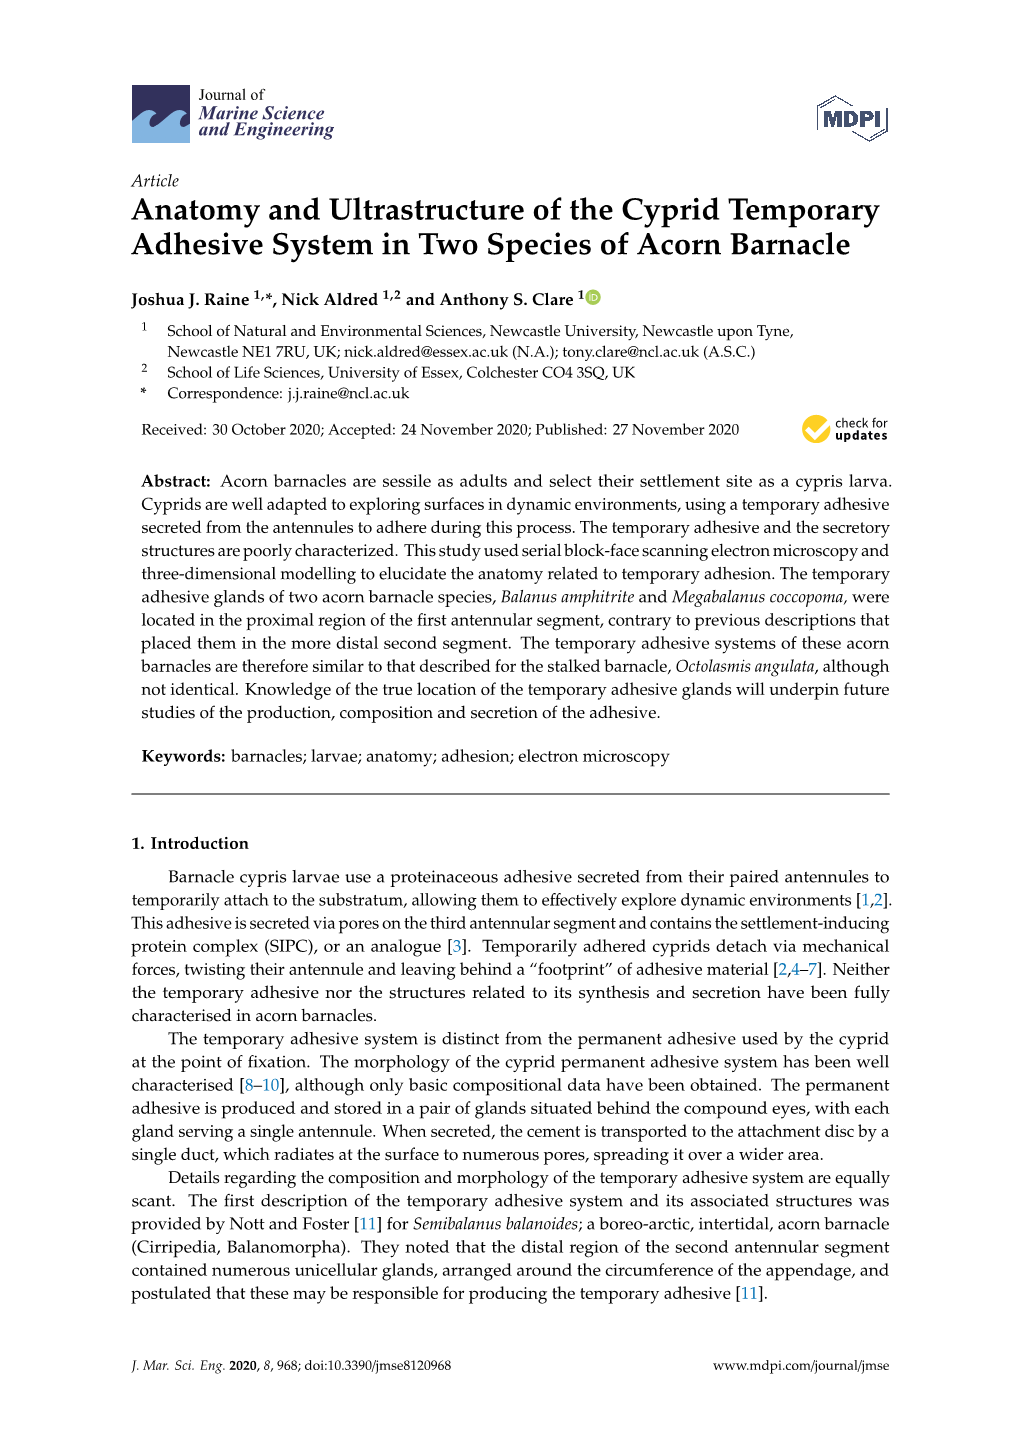 Anatomy and Ultrastructure of the Cyprid Temporary Adhesive System in Two Species of Acorn Barnacle